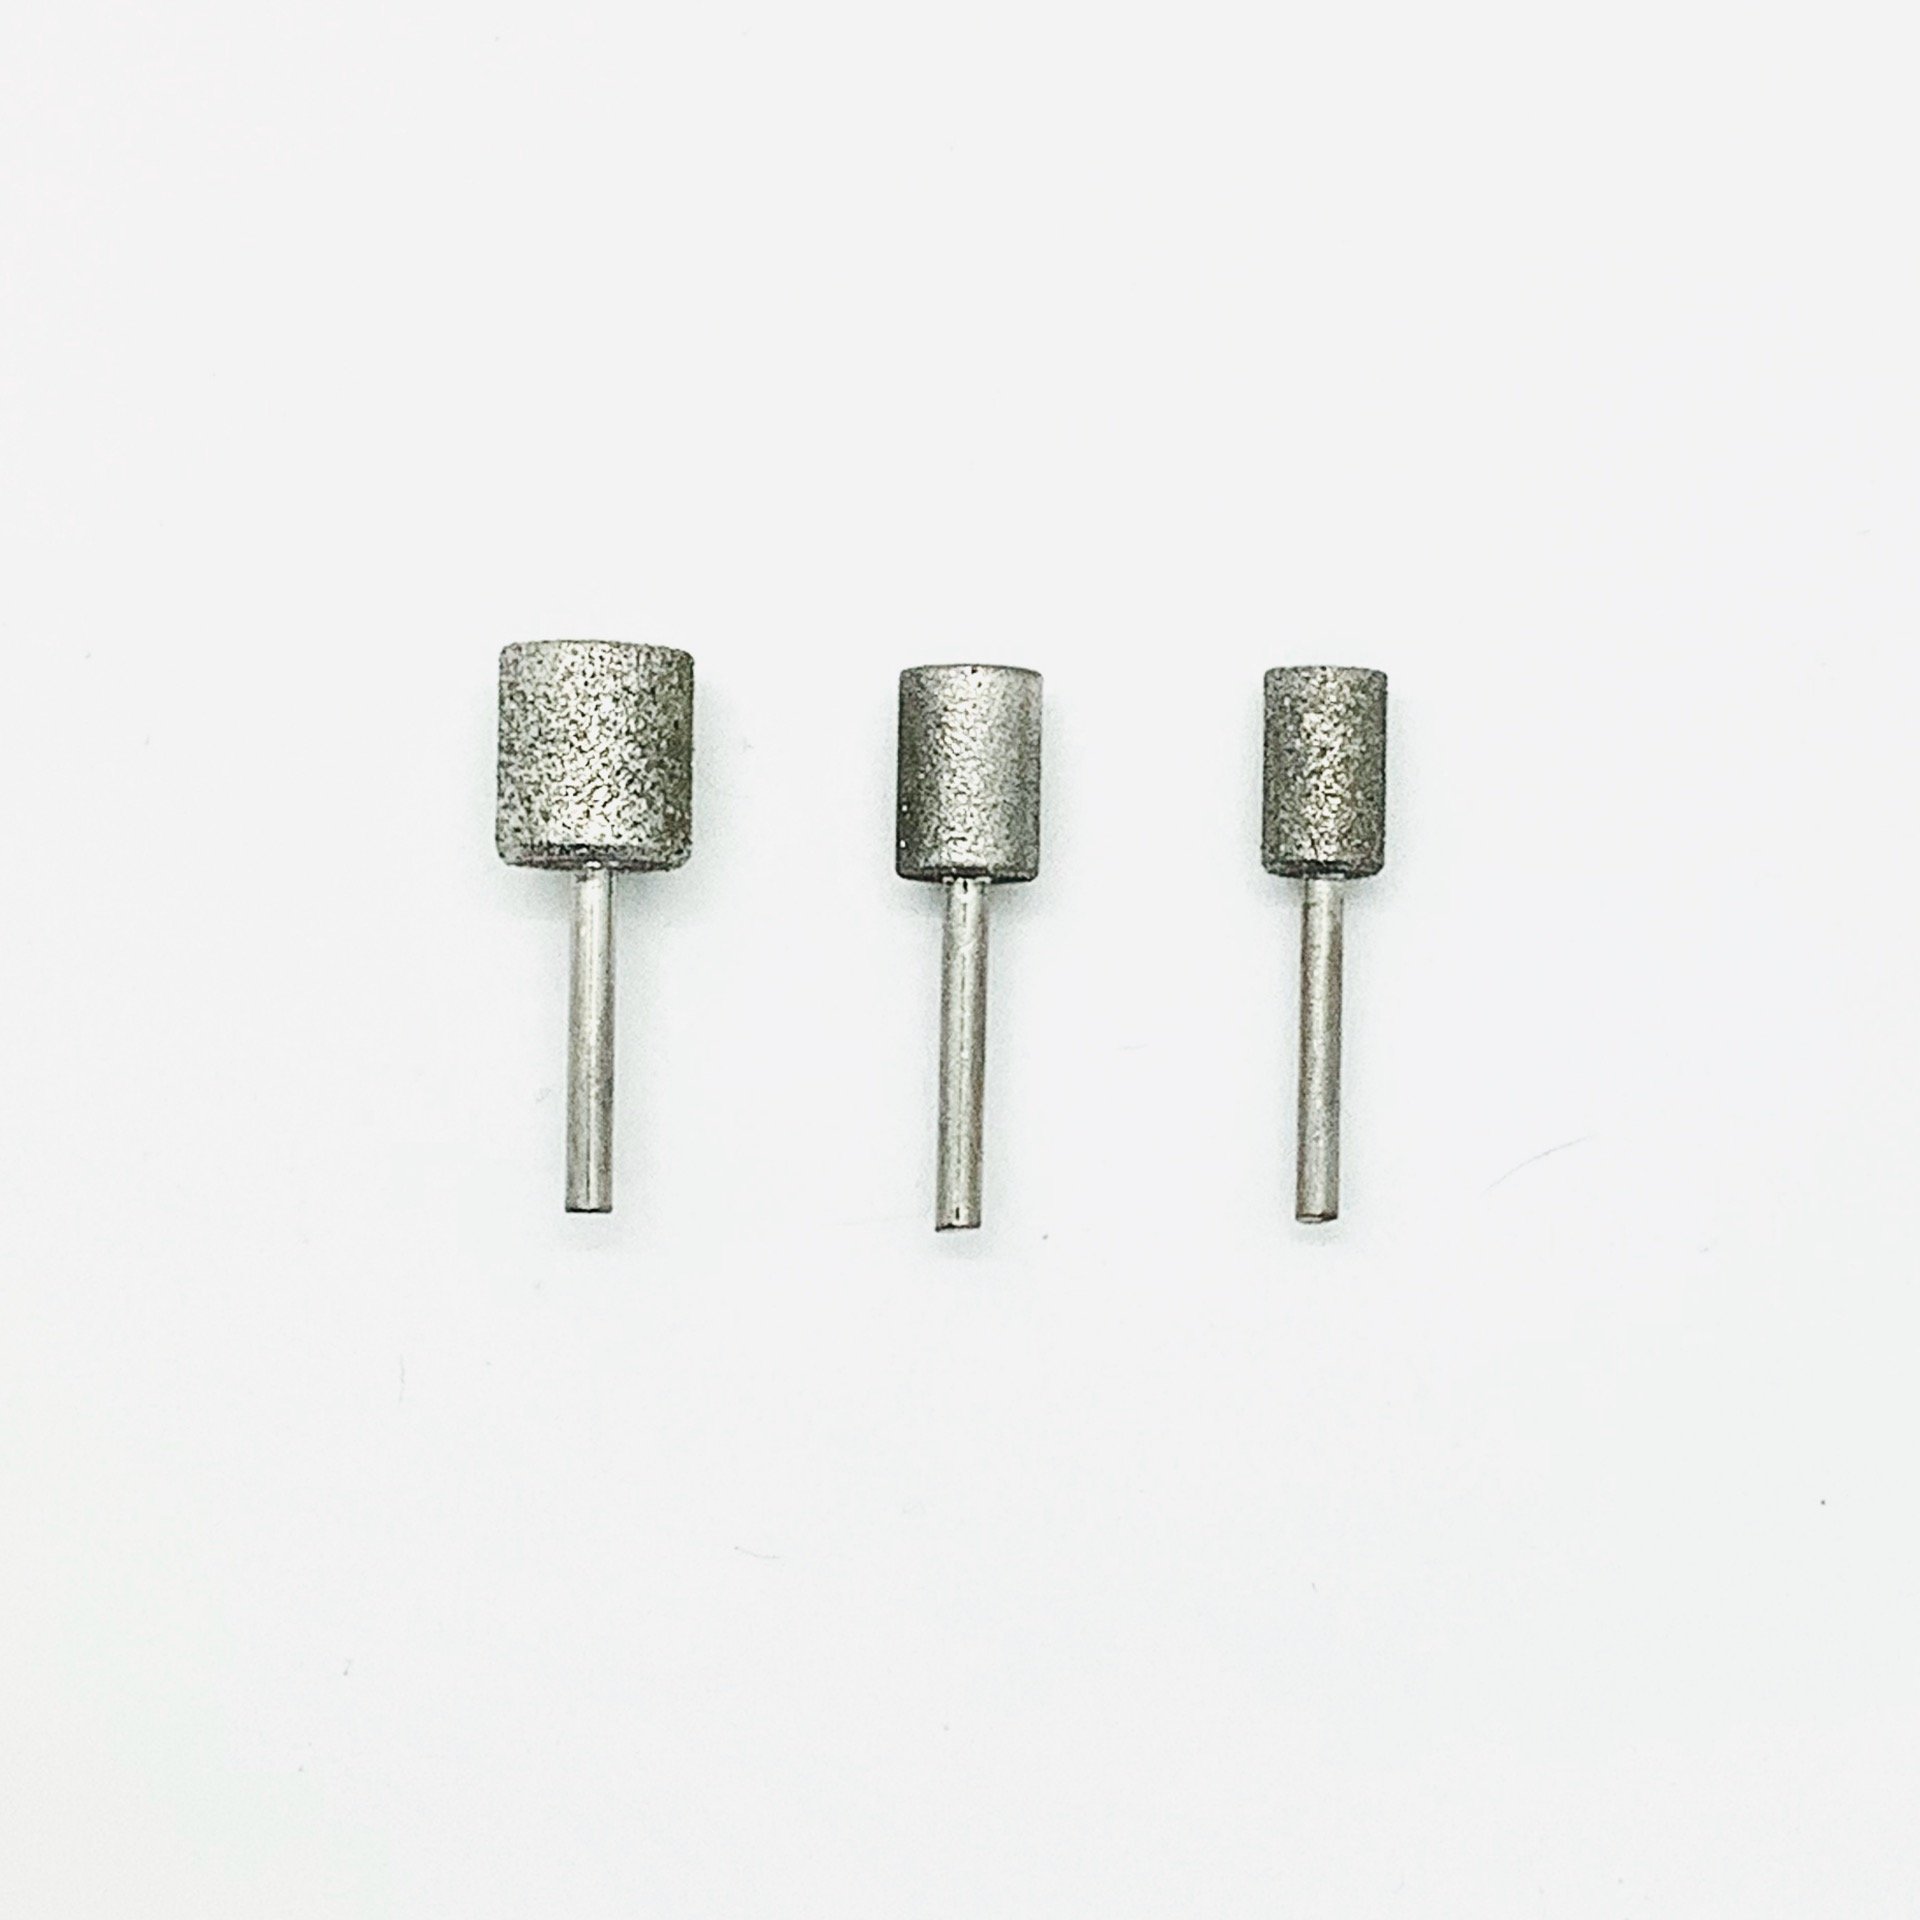 Diamond Dremel Bits - 3 Sizes, 2 in 1 Nail Grinder/Polisher Attachments -  Leading Edge Sharpening Services